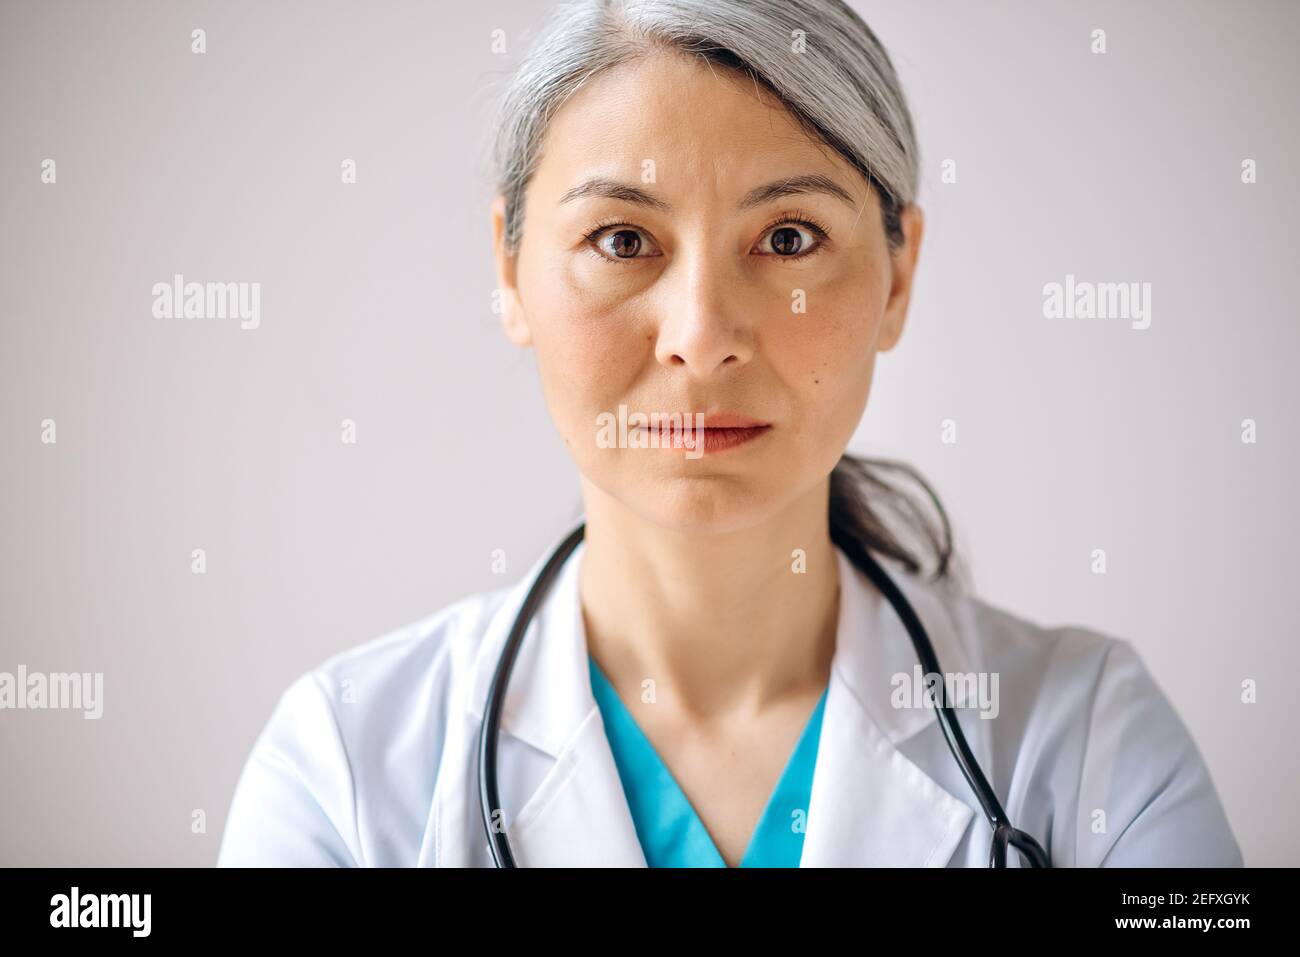 Close-up portrait of asian gray-haired female doctor, general practitioner or pediatrician in medical uniform and stethoscope, standing against isolated background and looking directly at the camera Stock Photo